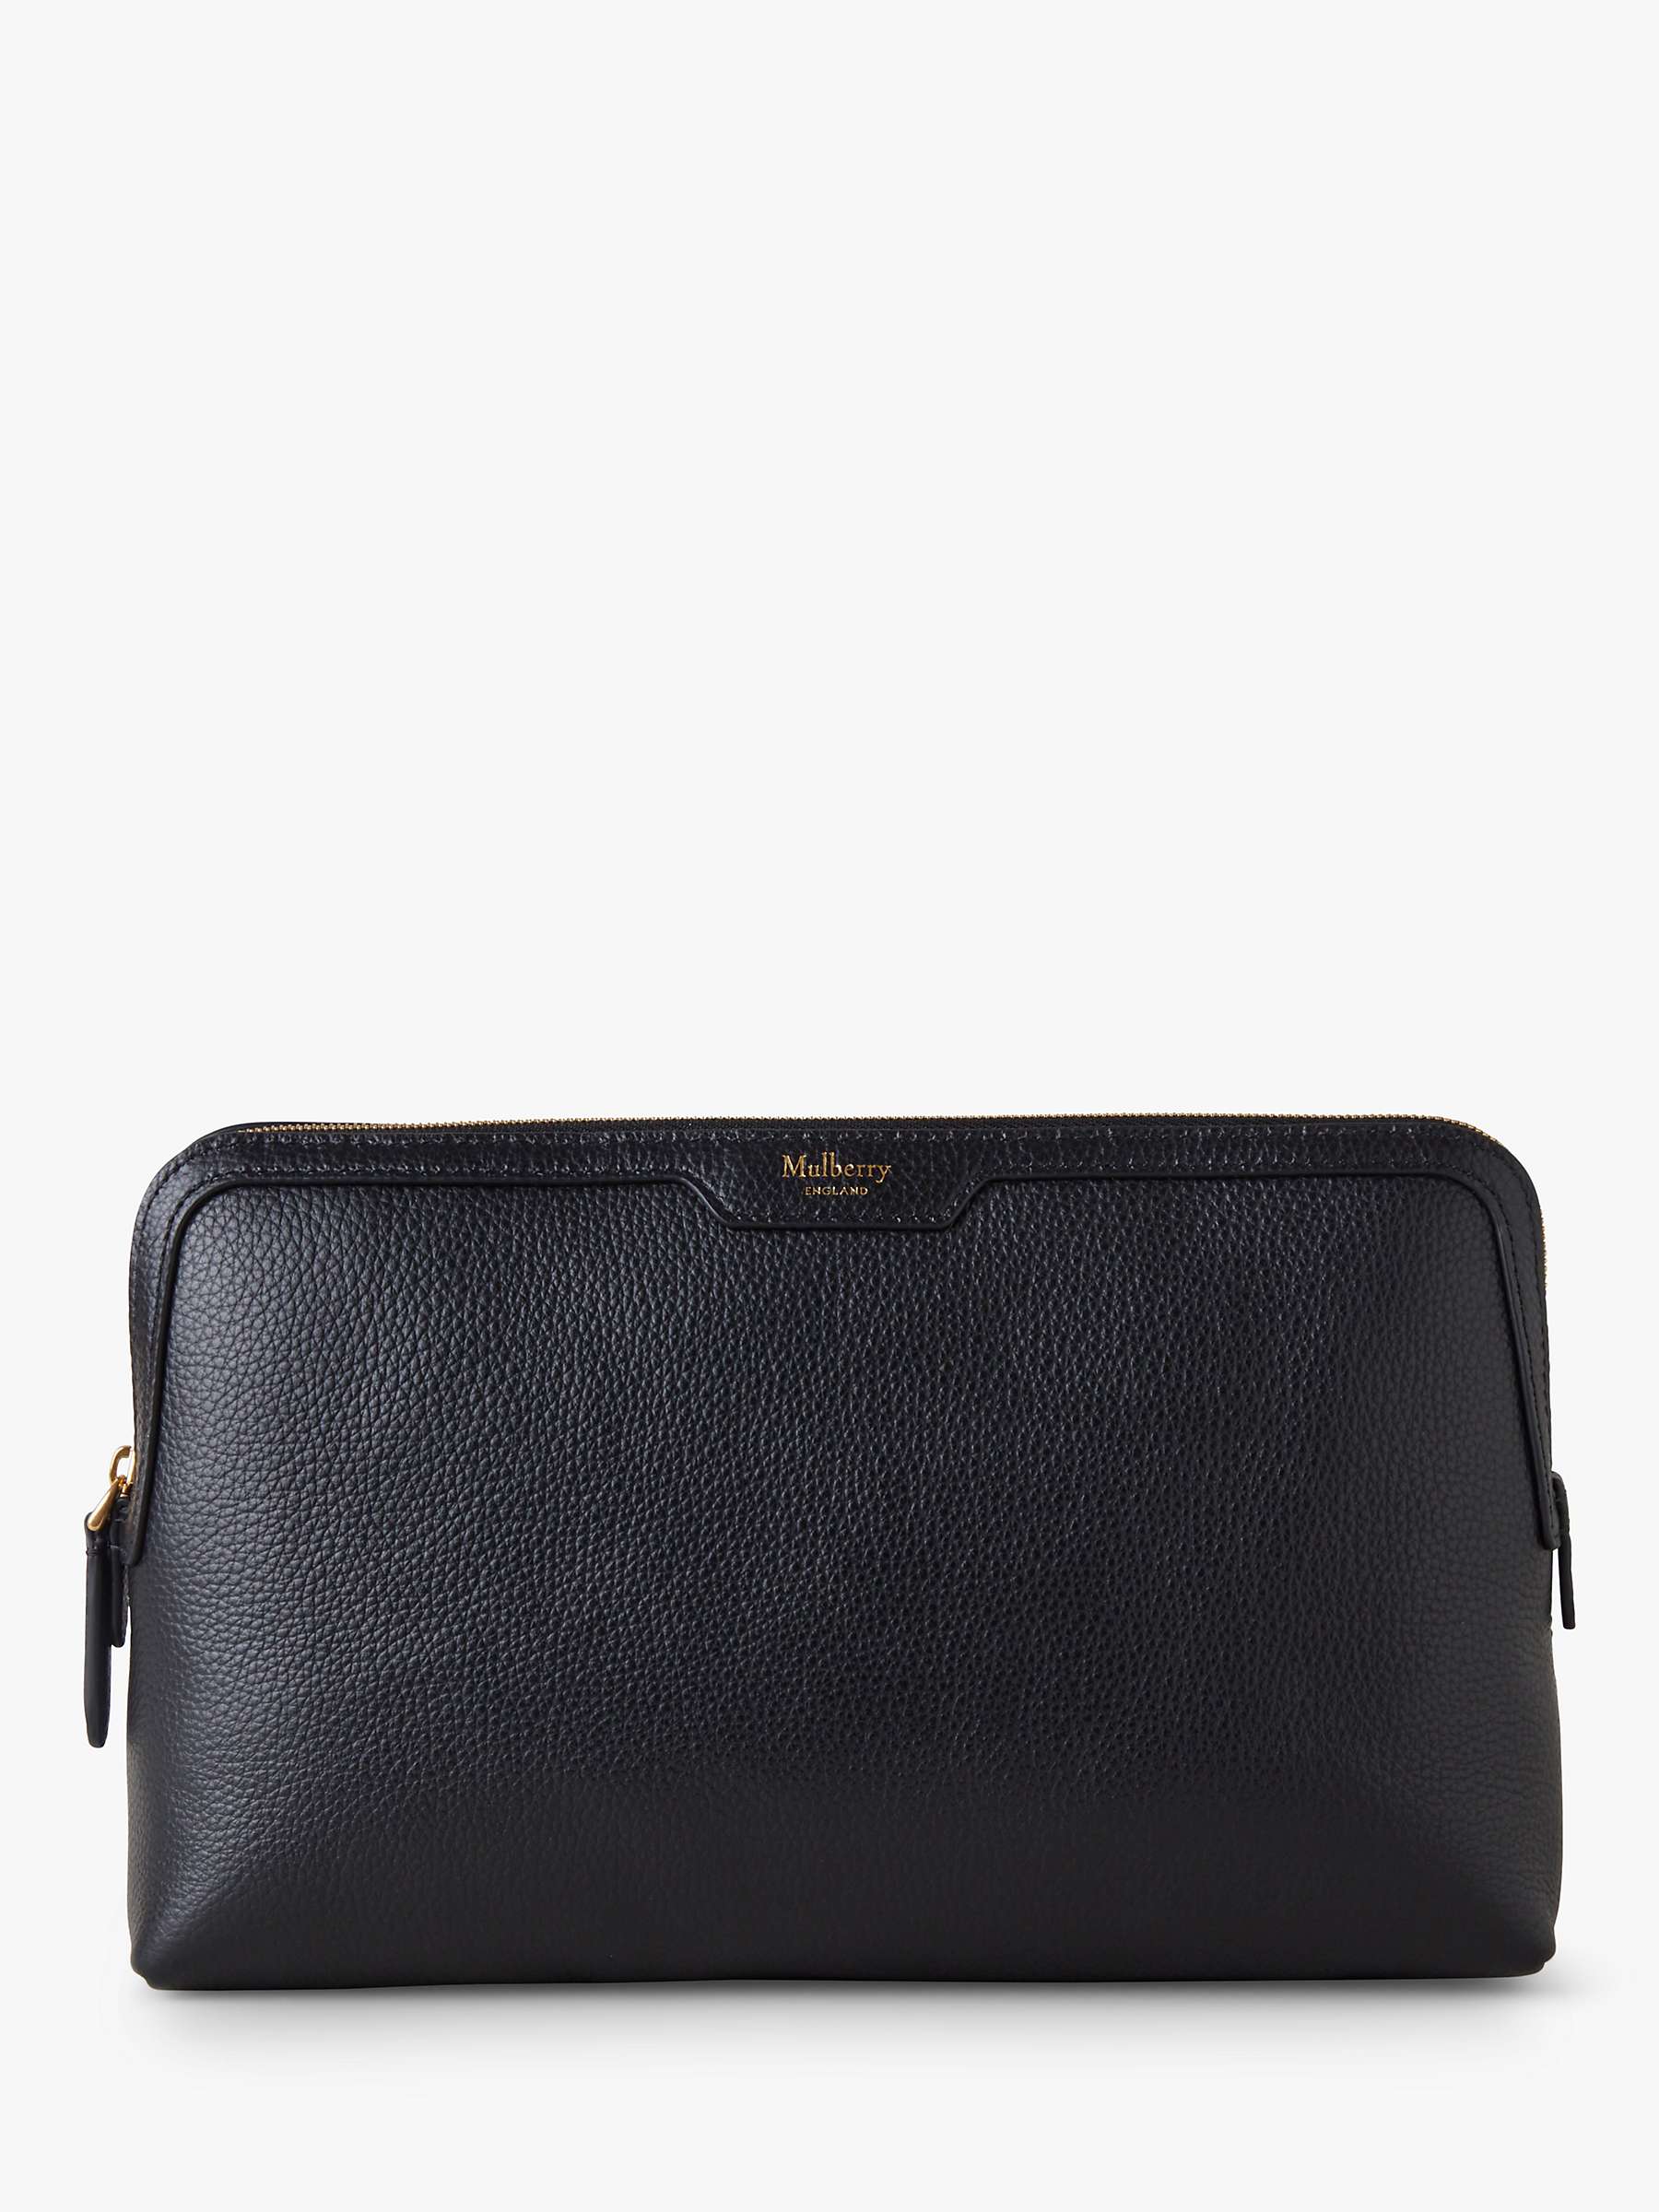 Buy Mulberry Classic Grain Leather Medium Cosmetic Pouch, Black Online at johnlewis.com